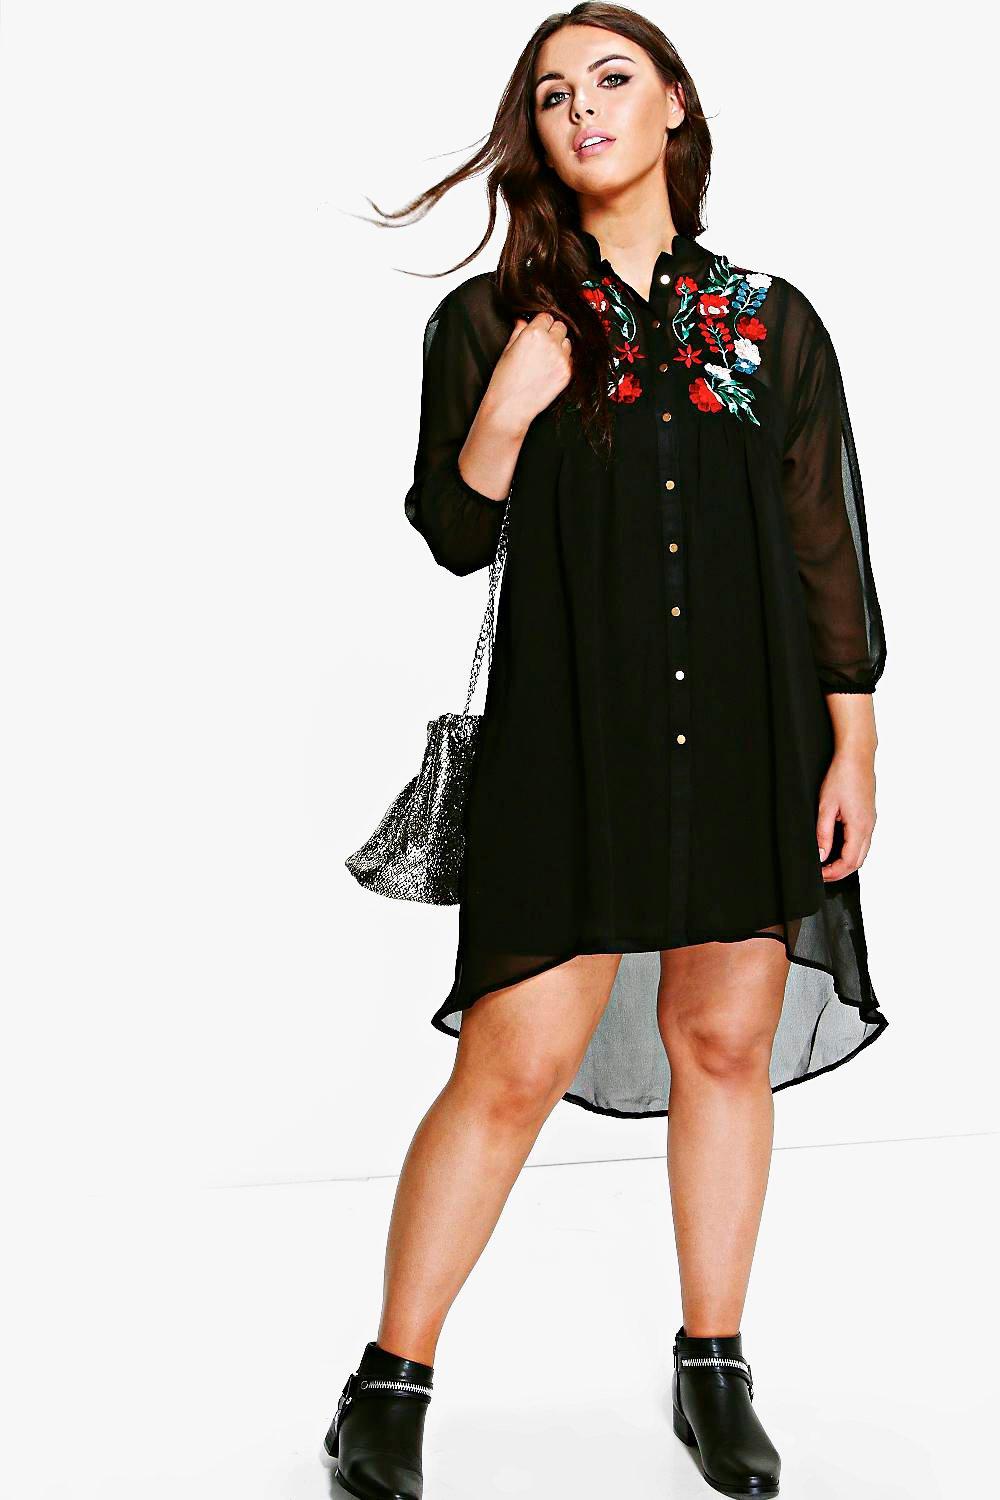 Plus Amerie Embroidered Shirt Dress at boohoo.com